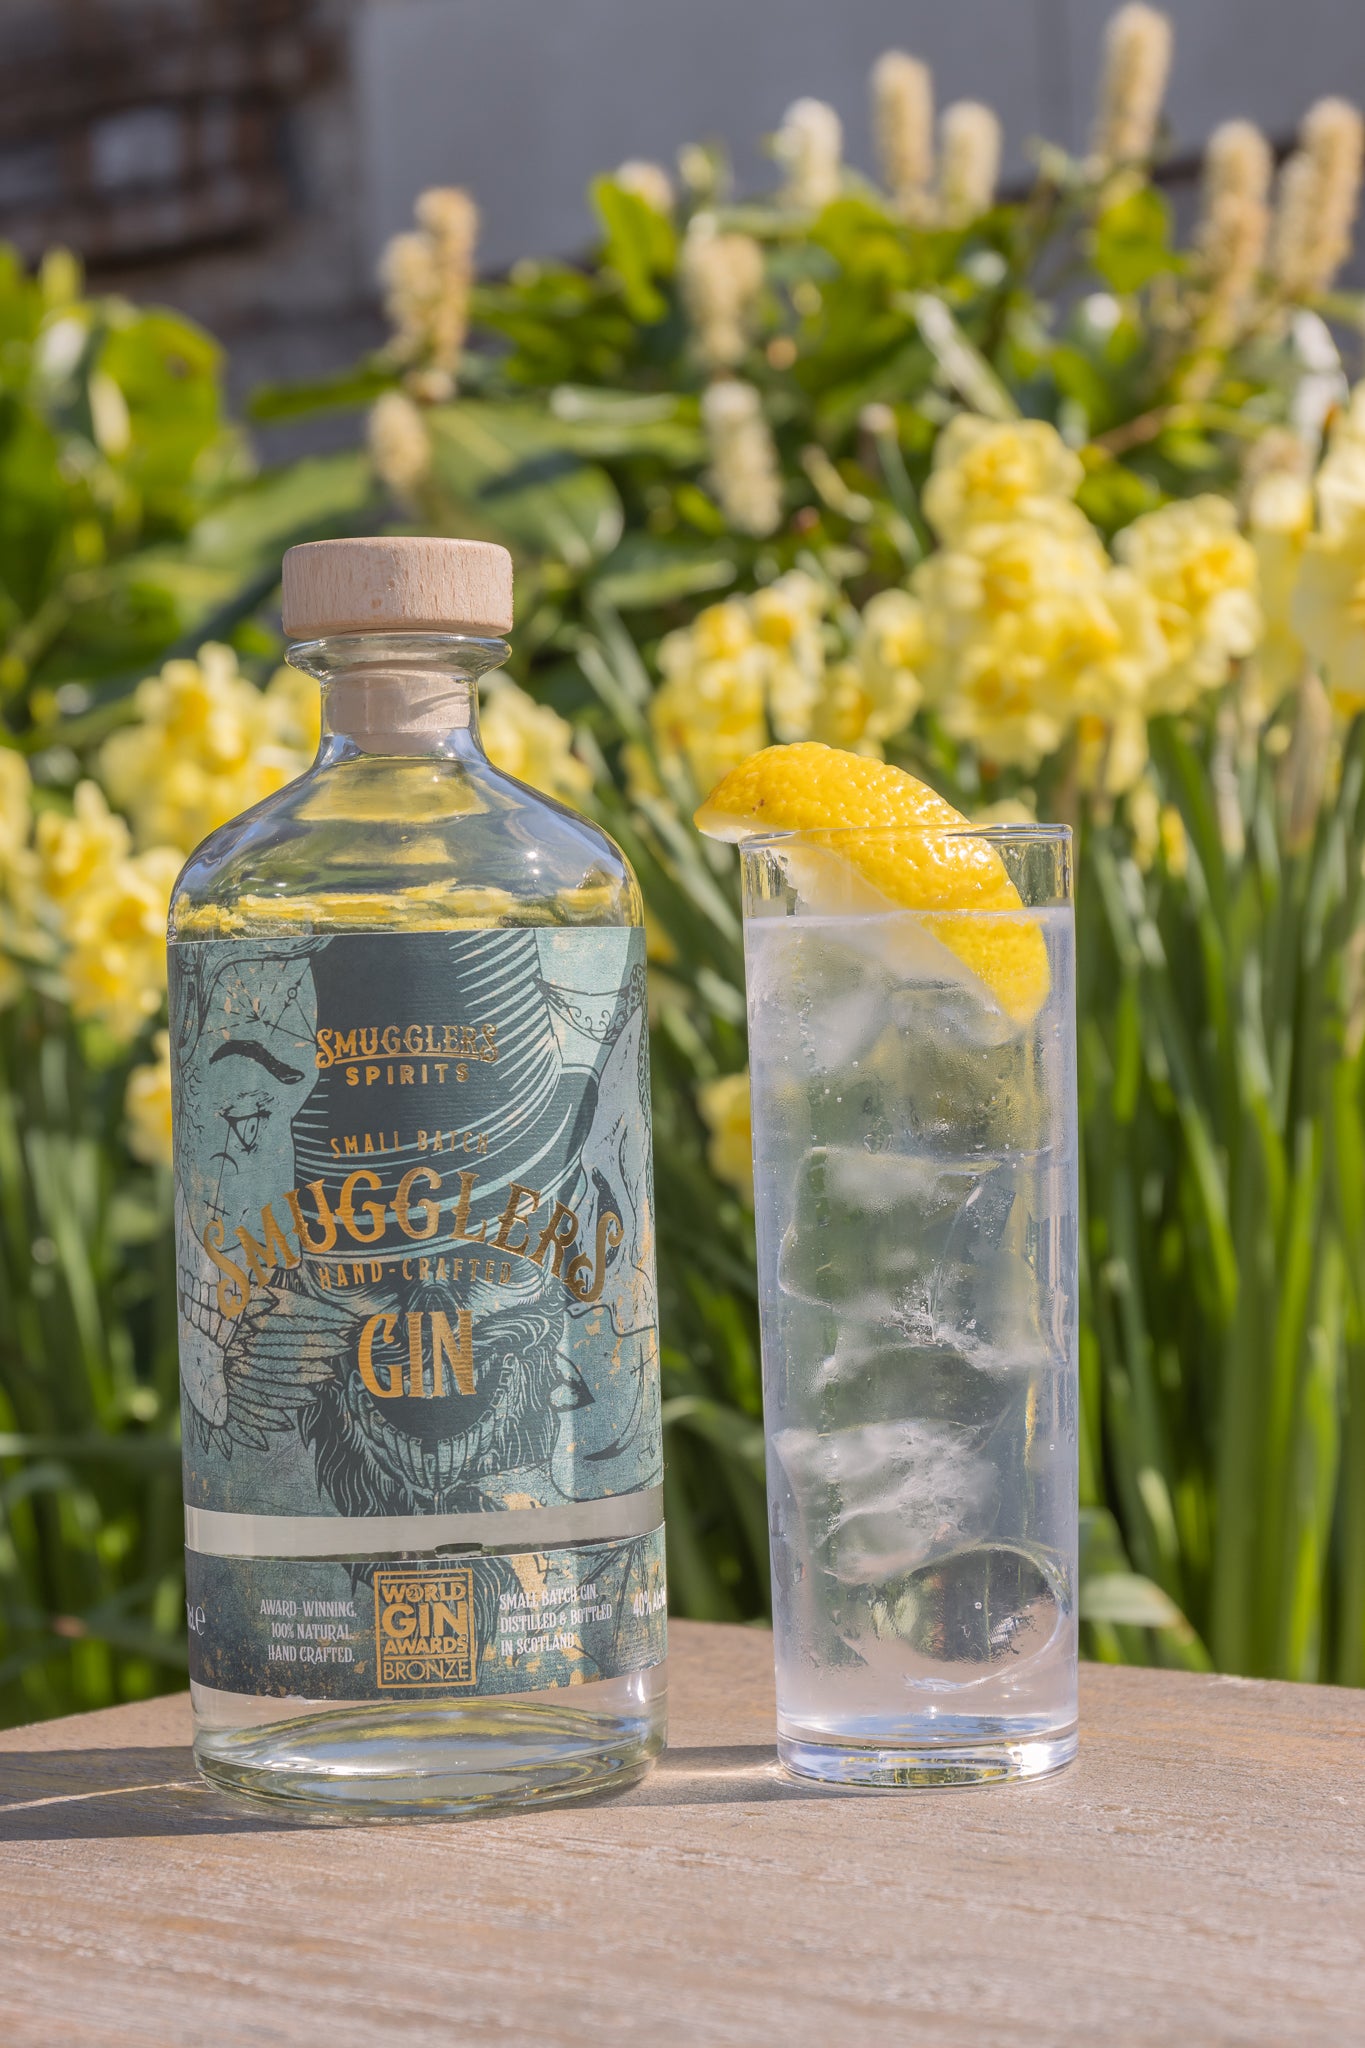 A glass of gin and tonic and a Smugglers Gin bottle sit on a table with a backdrop of daffodils